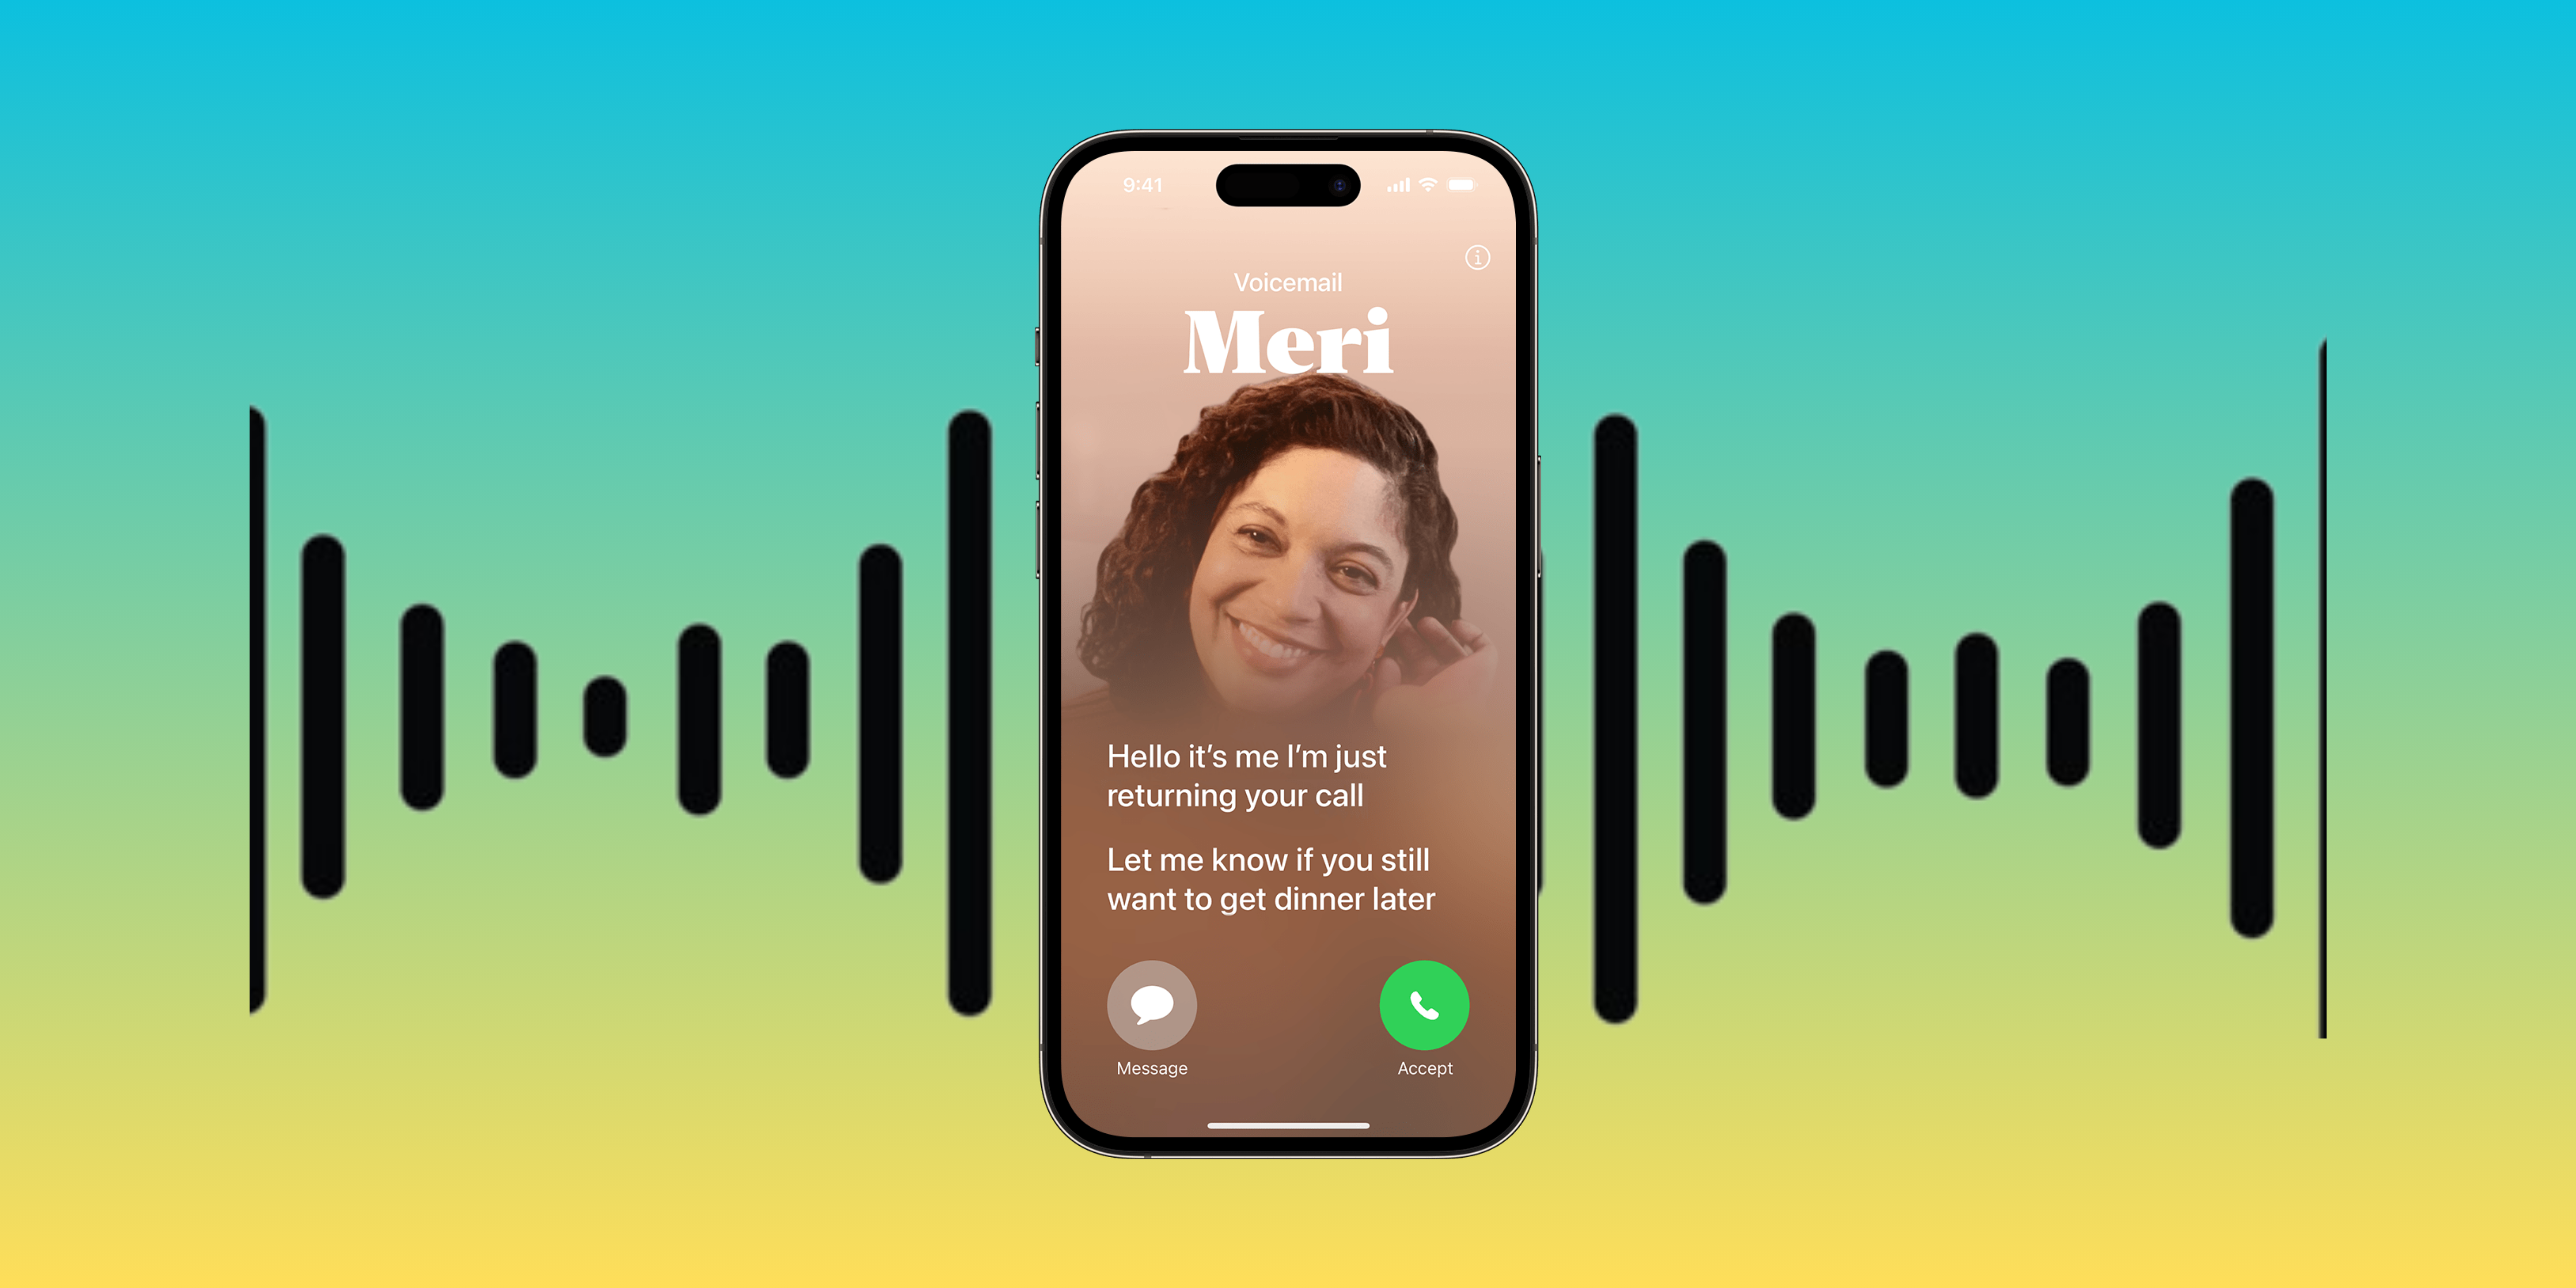 How to use Live Voicemail on iPhone